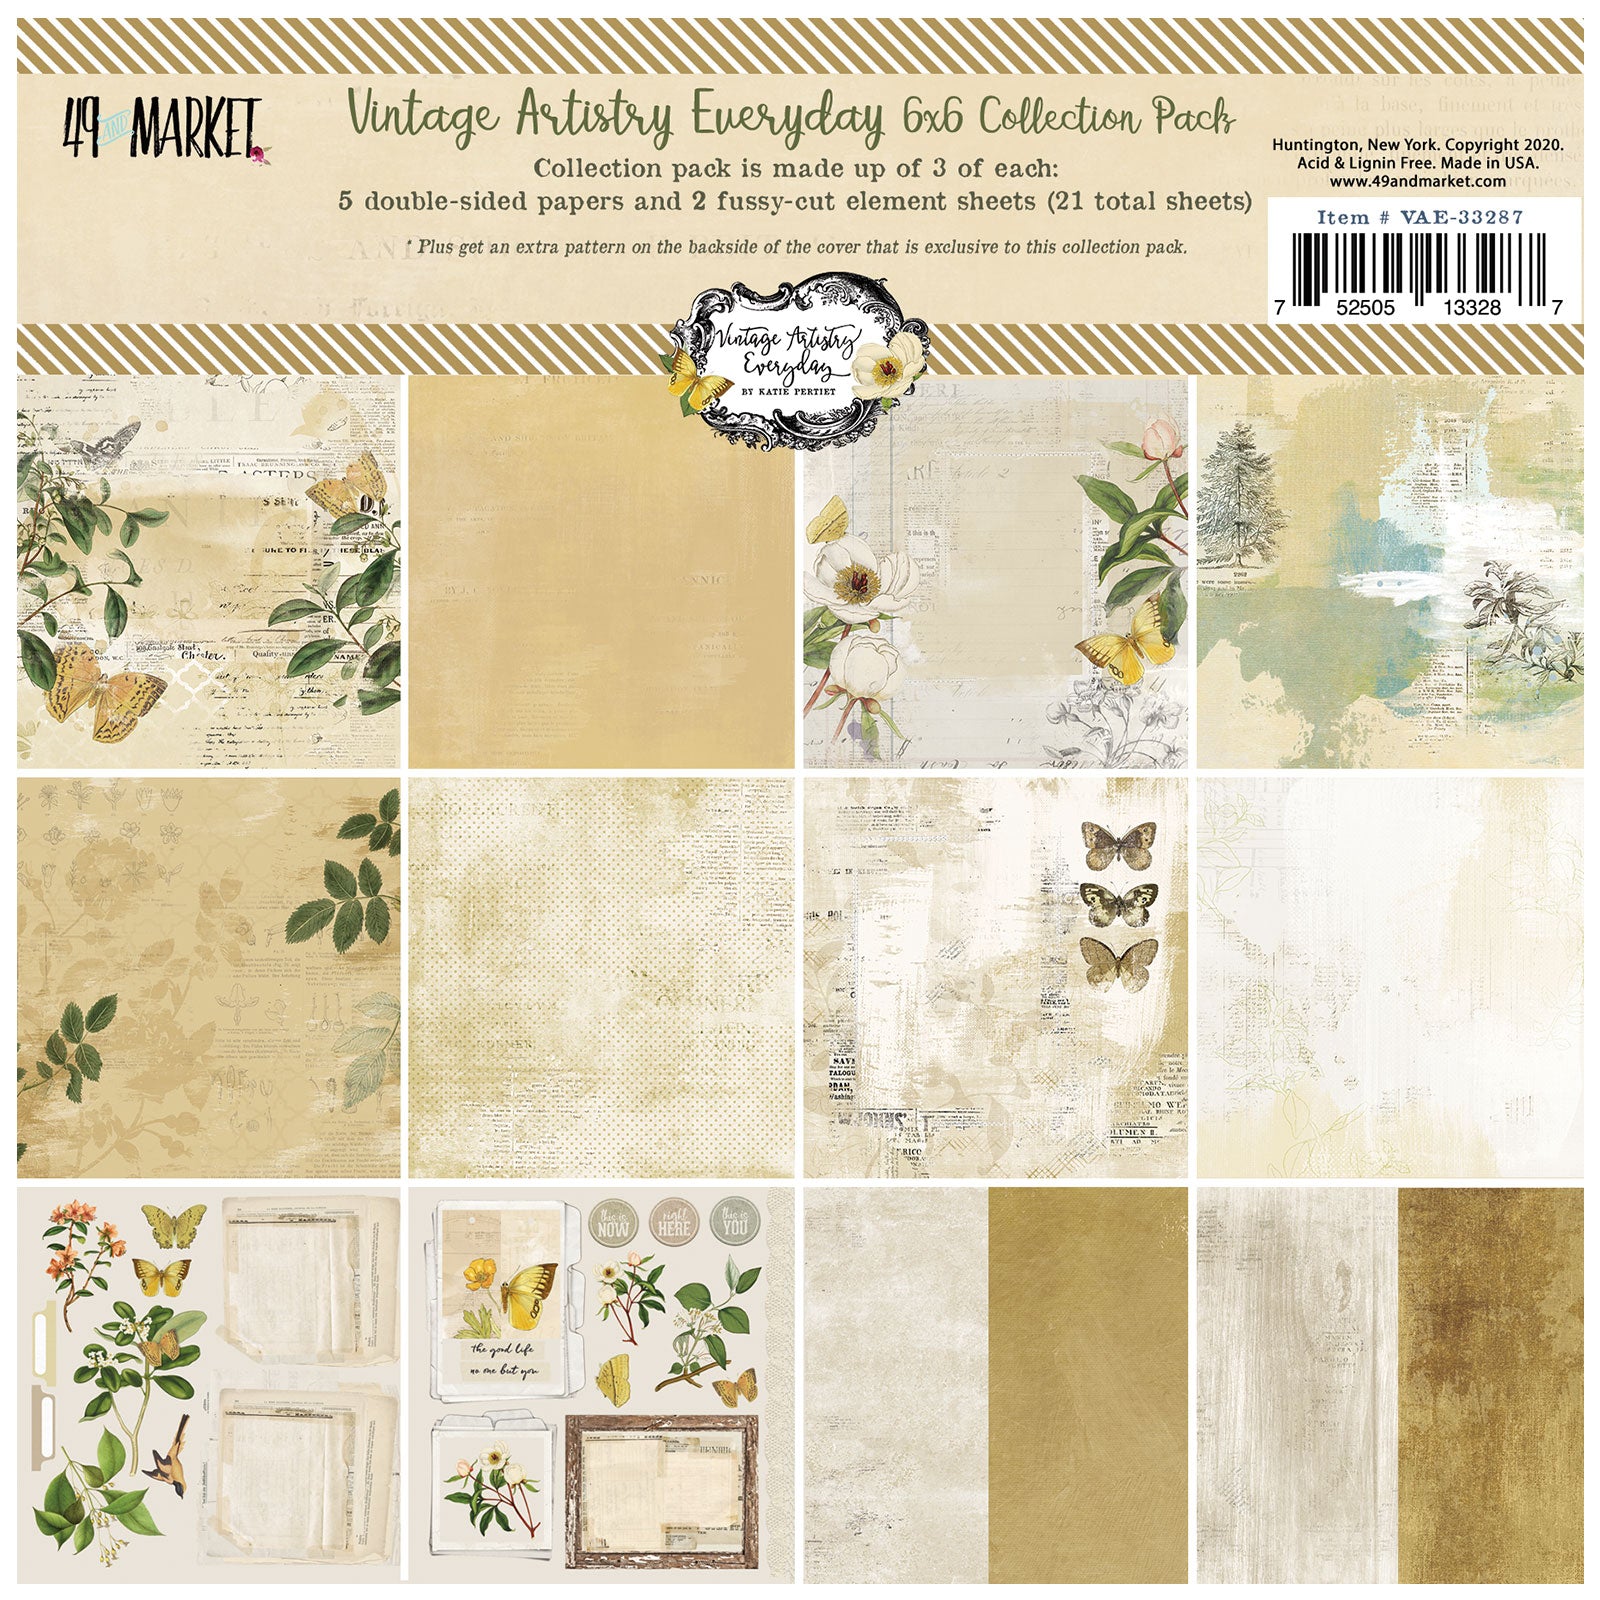 49 and Market - Vintage Artistry Everyday Collections - 6 x 6"